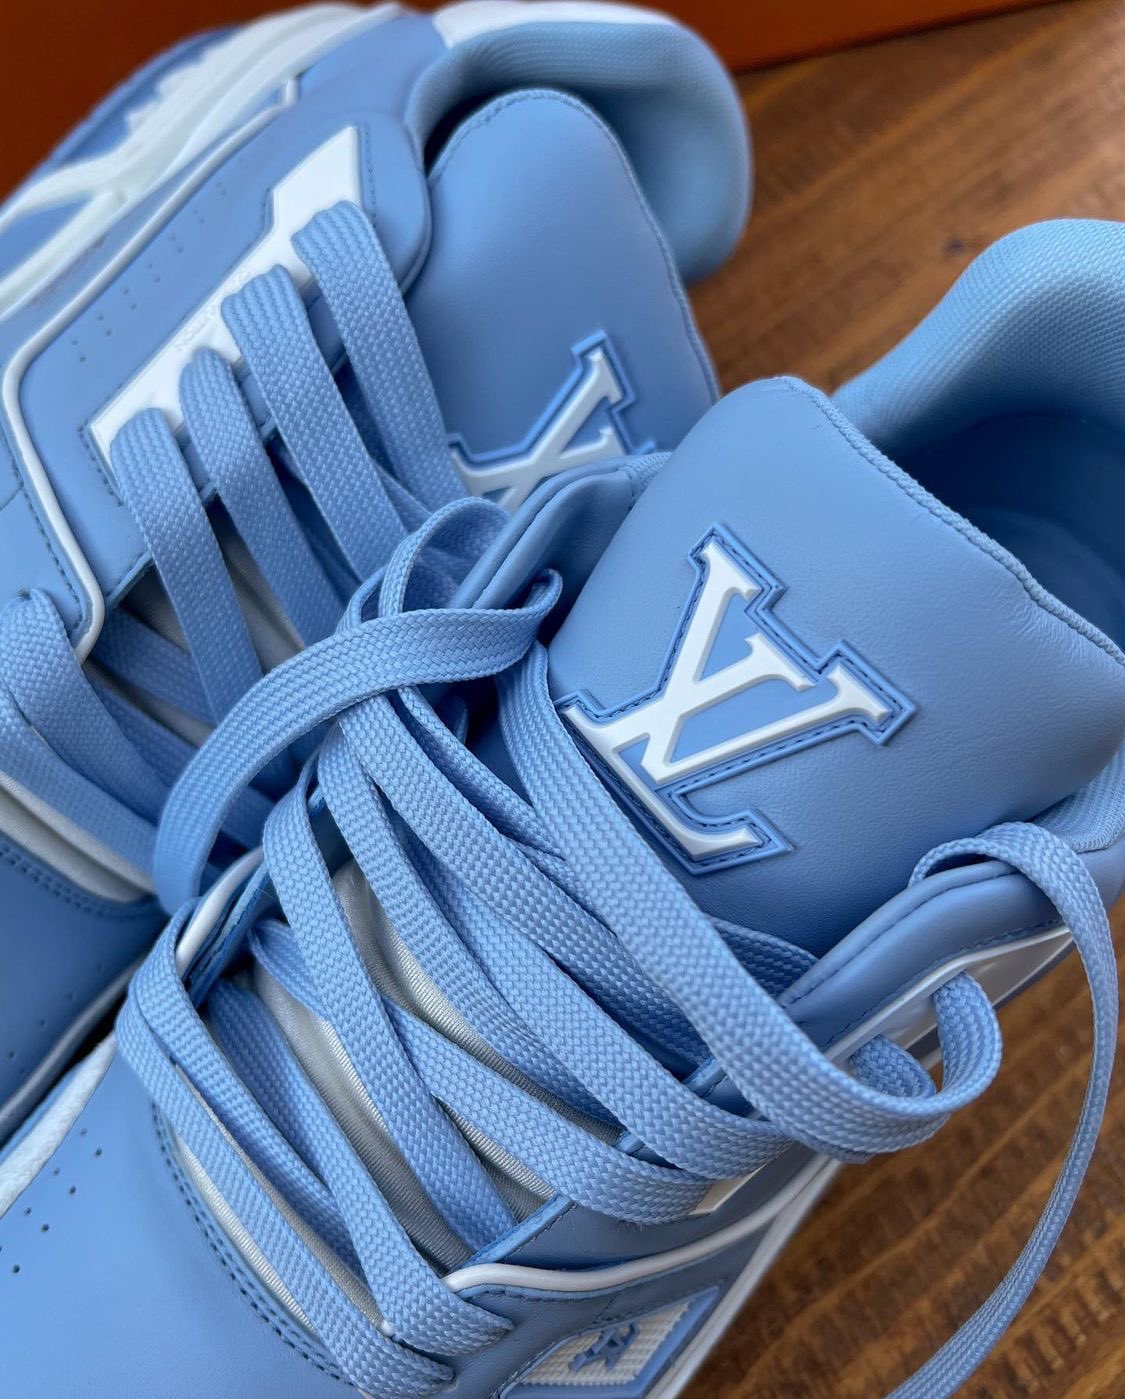 Ovrnundr on X: The Louis Vuitton LVSK8 sneakers will reportedly